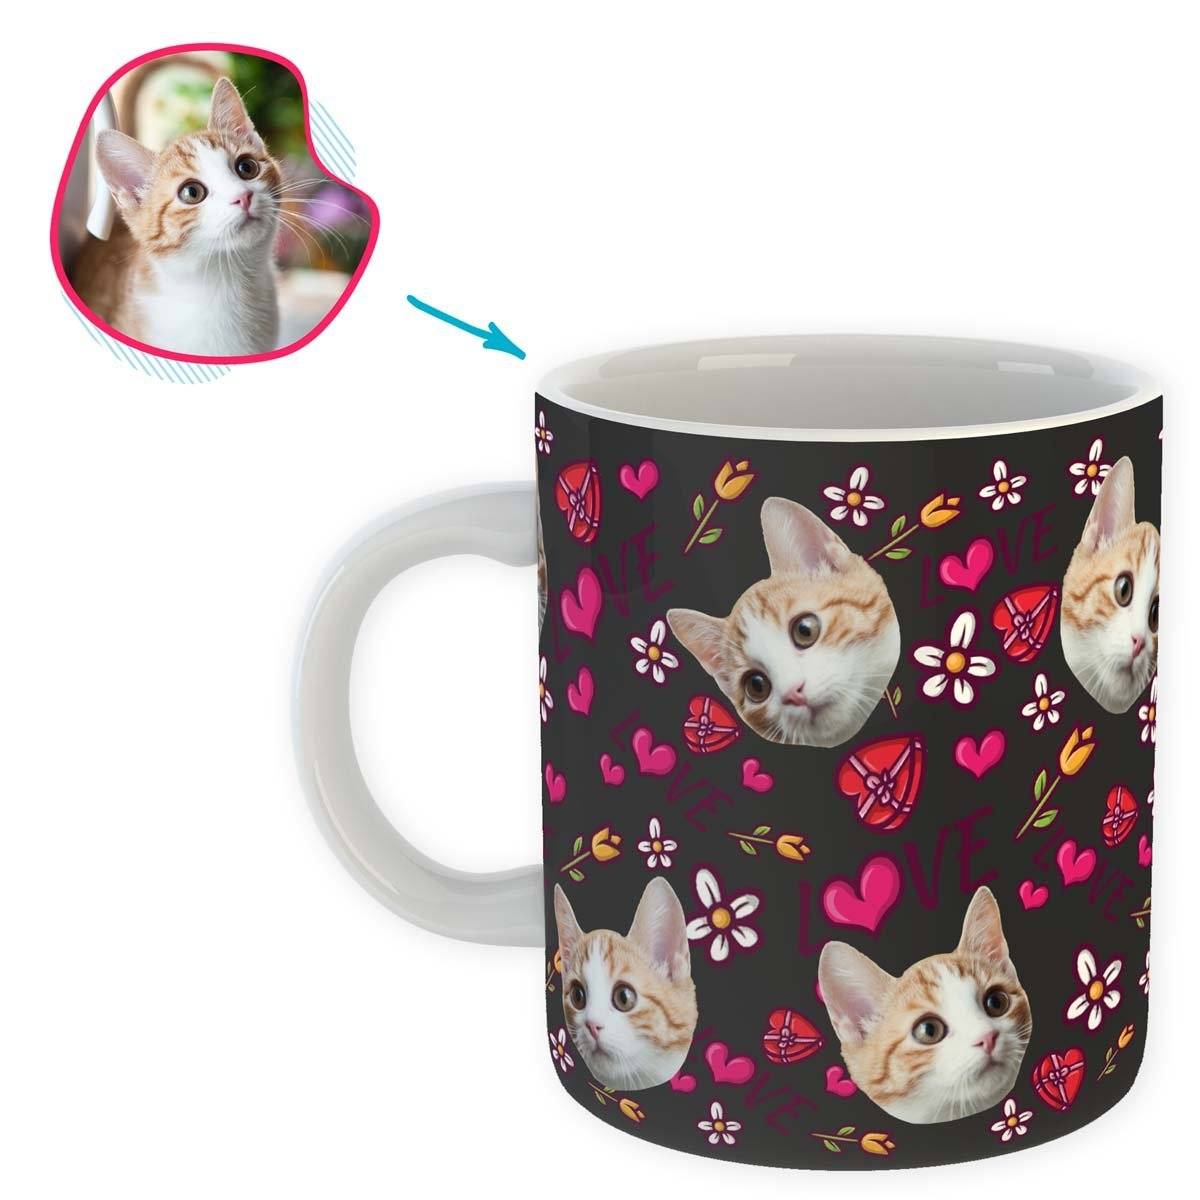 dark Hearts and Flowers mug personalized with photo of face printed on it